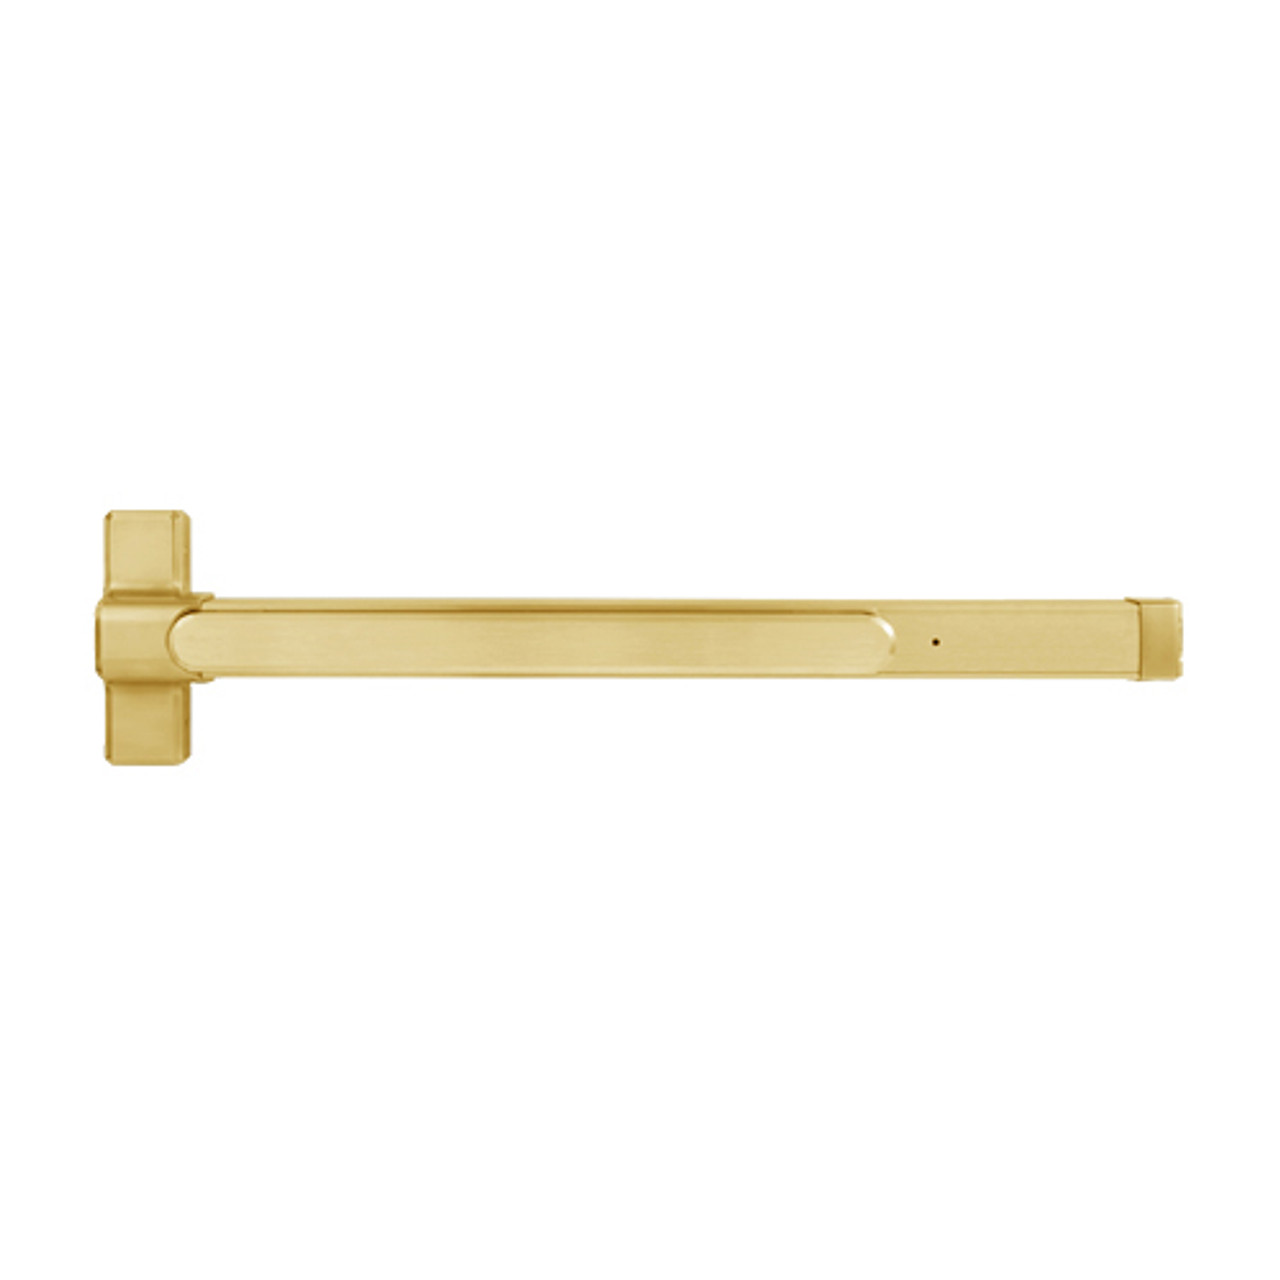 QED127LRX-36-7-605 Stanley QED100 Series Heavy Duty Concealed Vertical Rod Hex Dog Exit Device in Bright Brass Finish